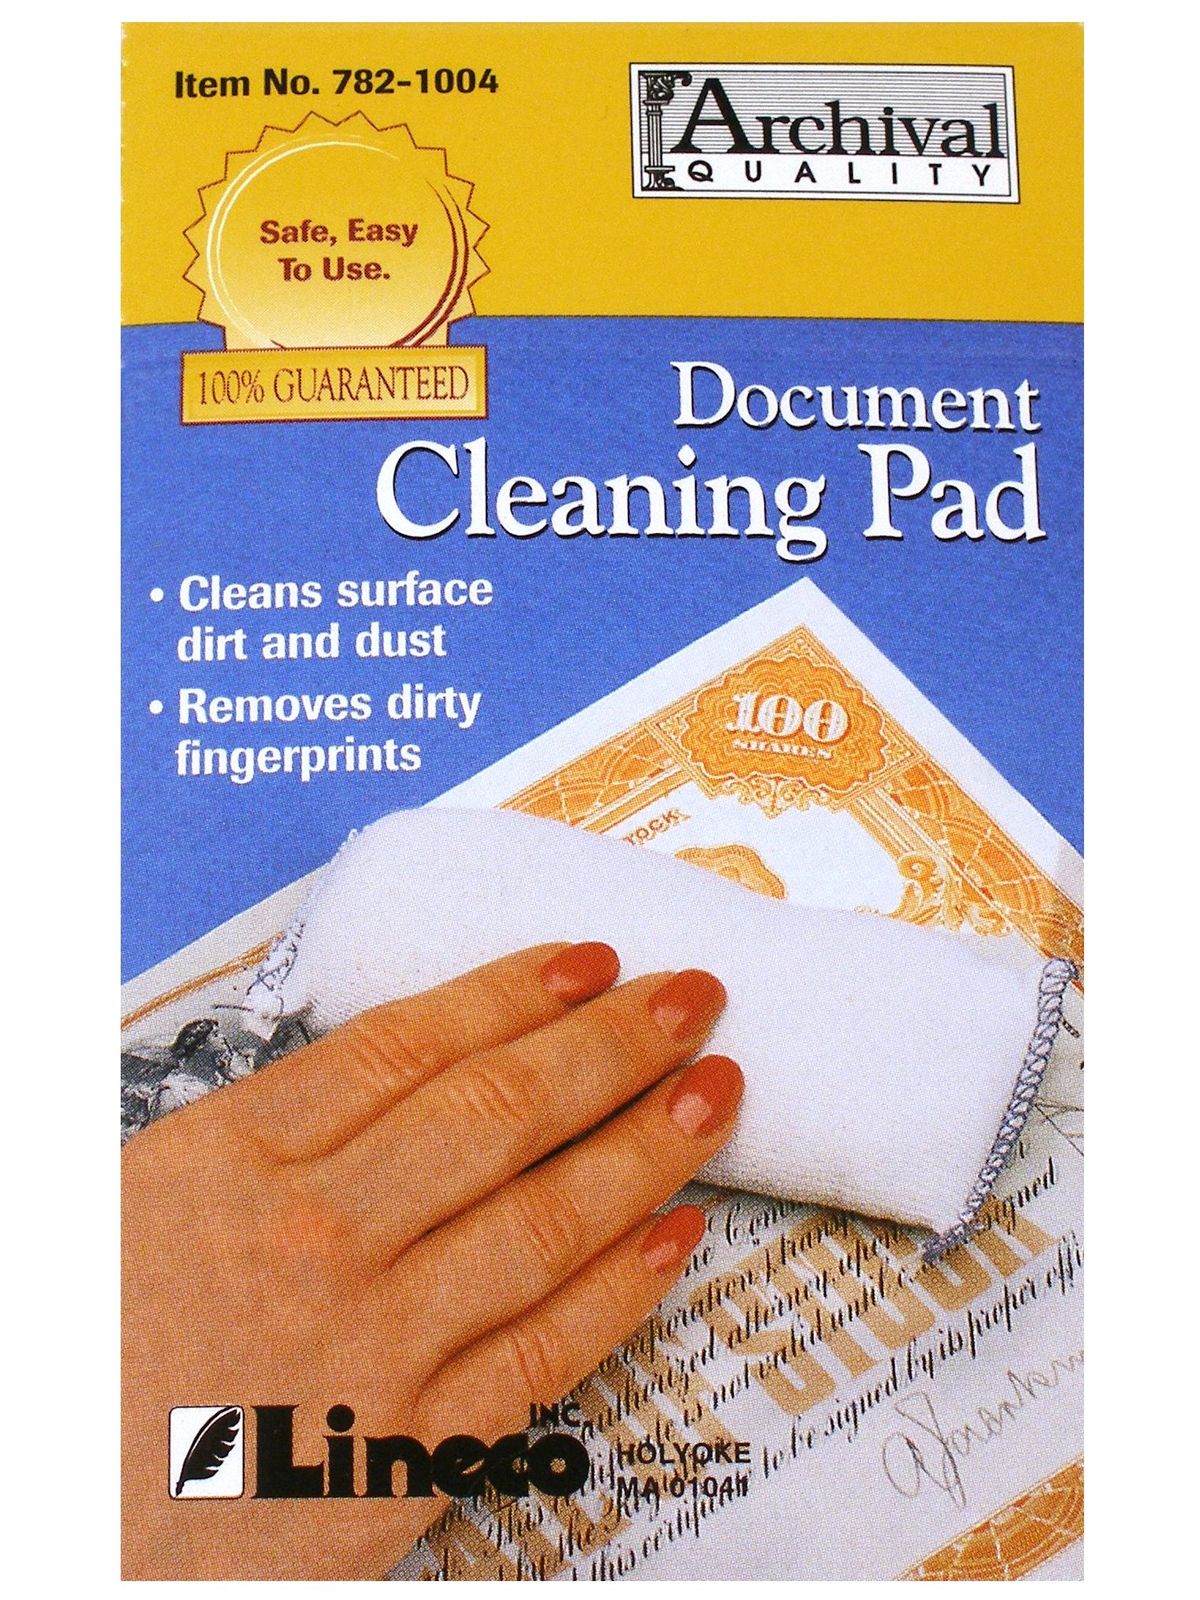 Document Cleaning Pads Each